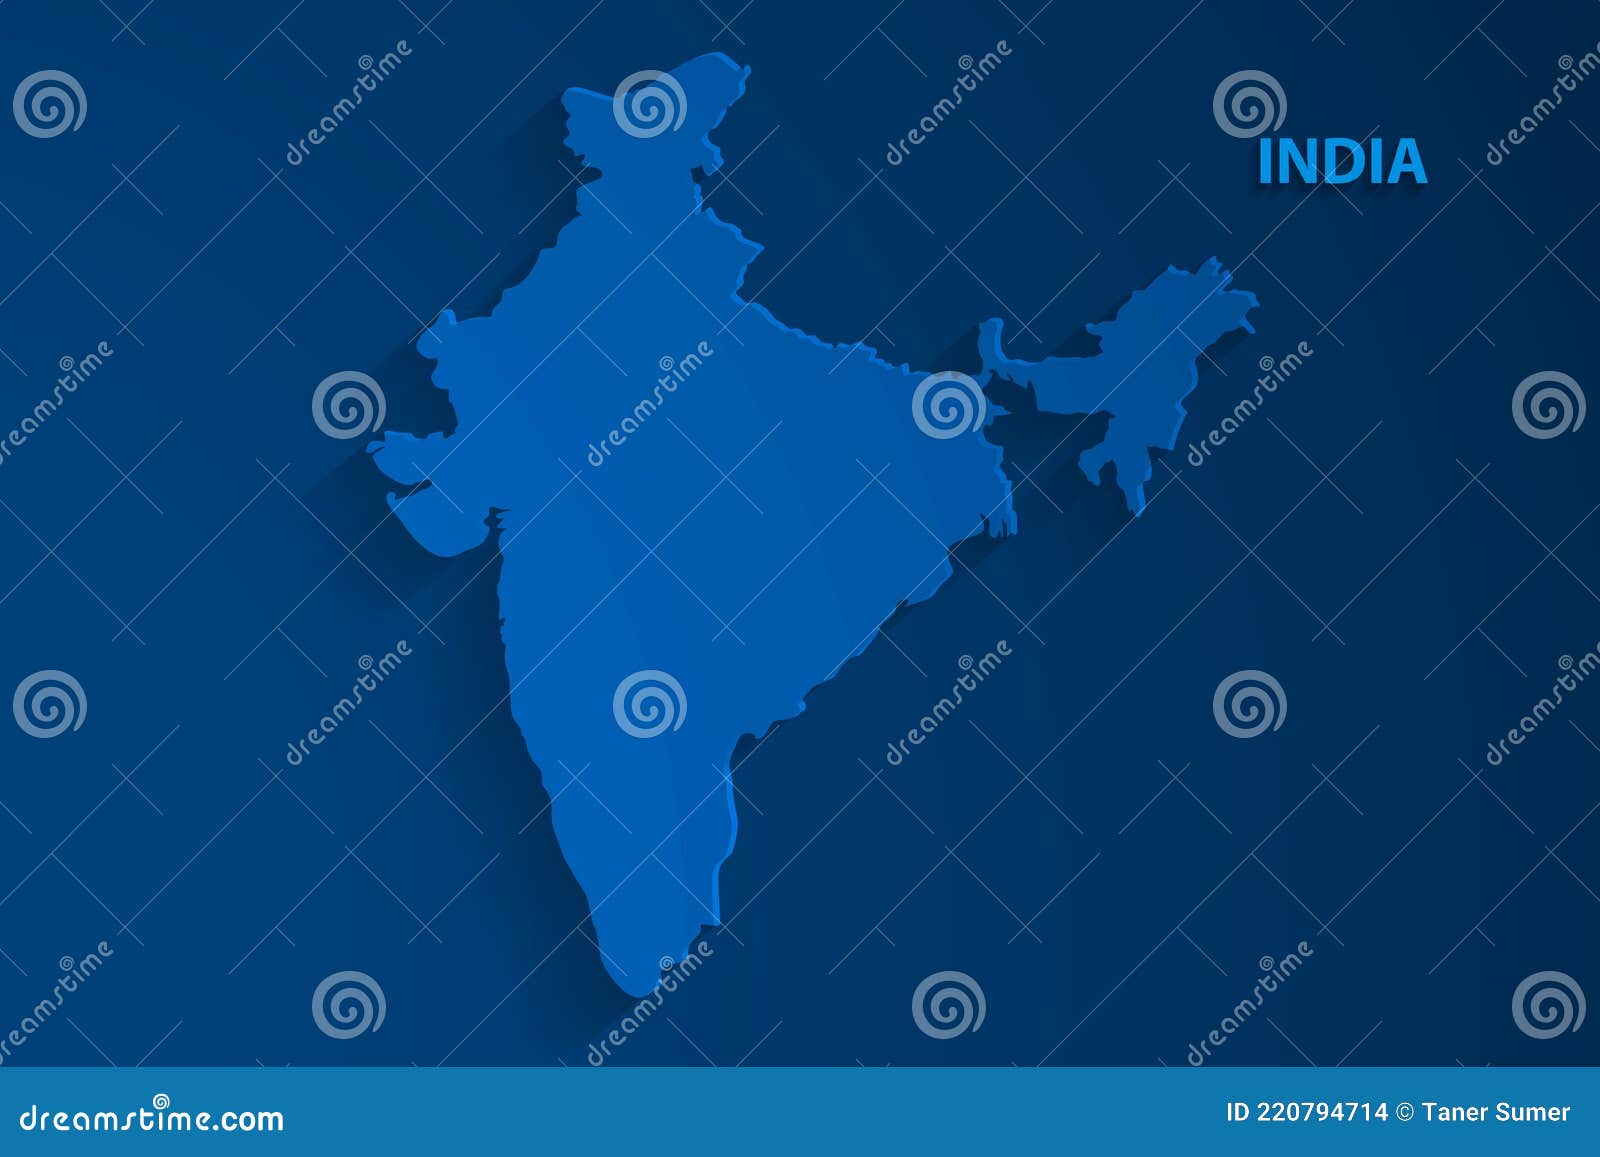 Blue India Map Background, Vector Stock Vector - Illustration of indian,  global: 220794714